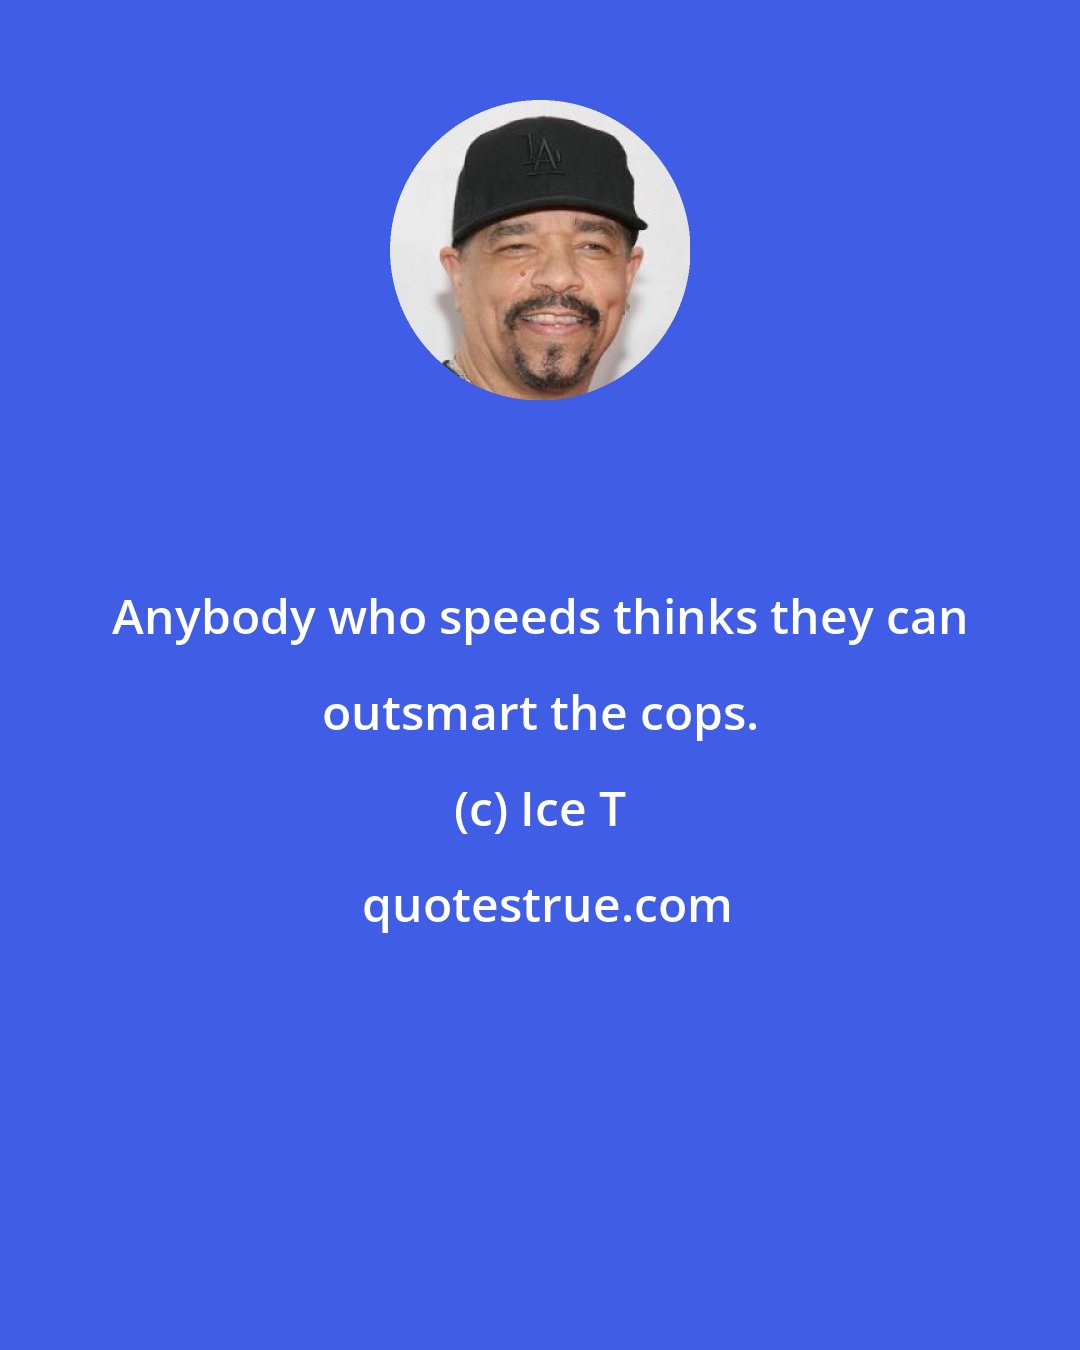 Ice T: Anybody who speeds thinks they can outsmart the cops.